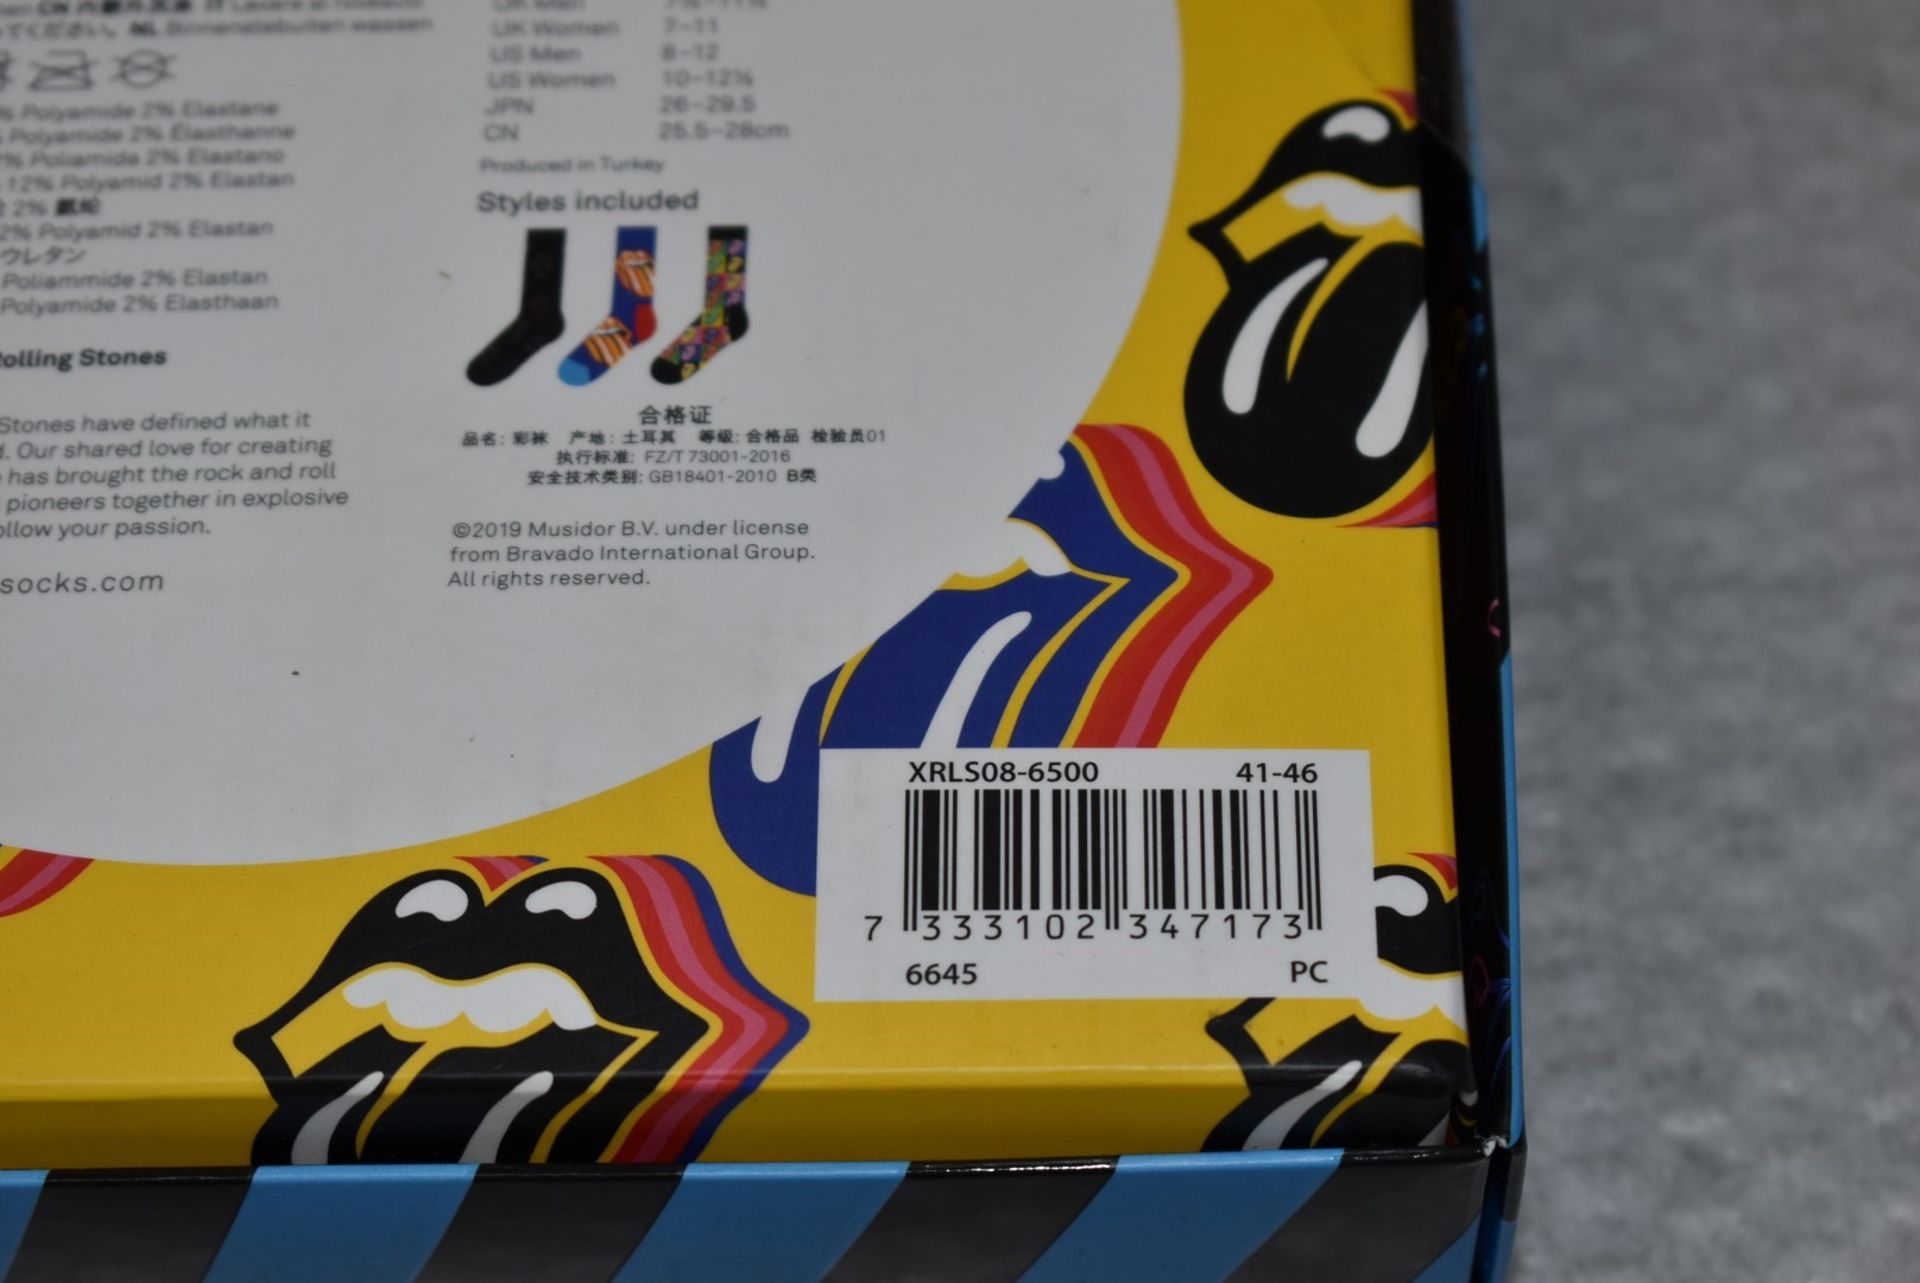 1 x Happy Socks Rolling Stones Gift Set - Officially Licensed Merchandise - New & Unused - RRP £40 - Image 6 of 6